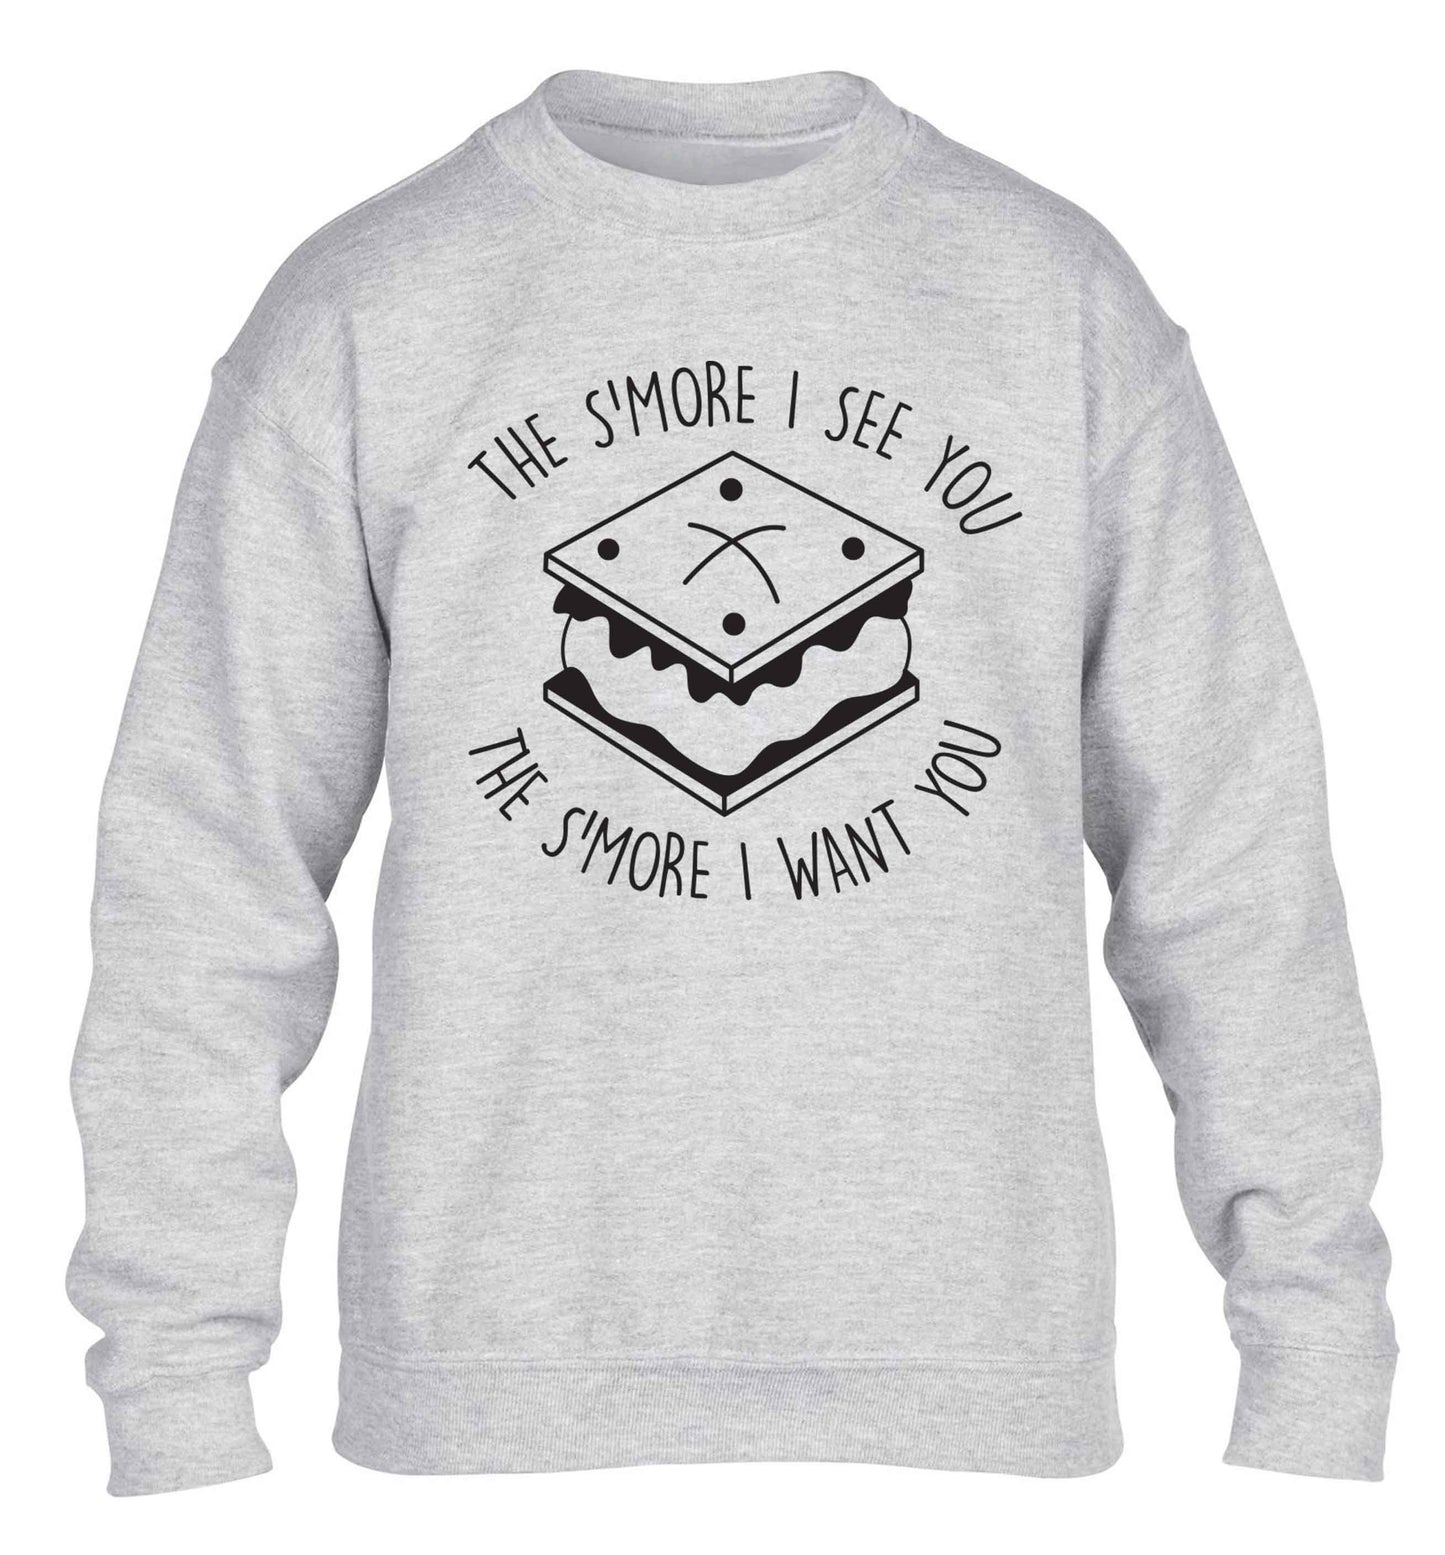 The s'more I see you the s'more I want you children's grey sweater 12-13 Years